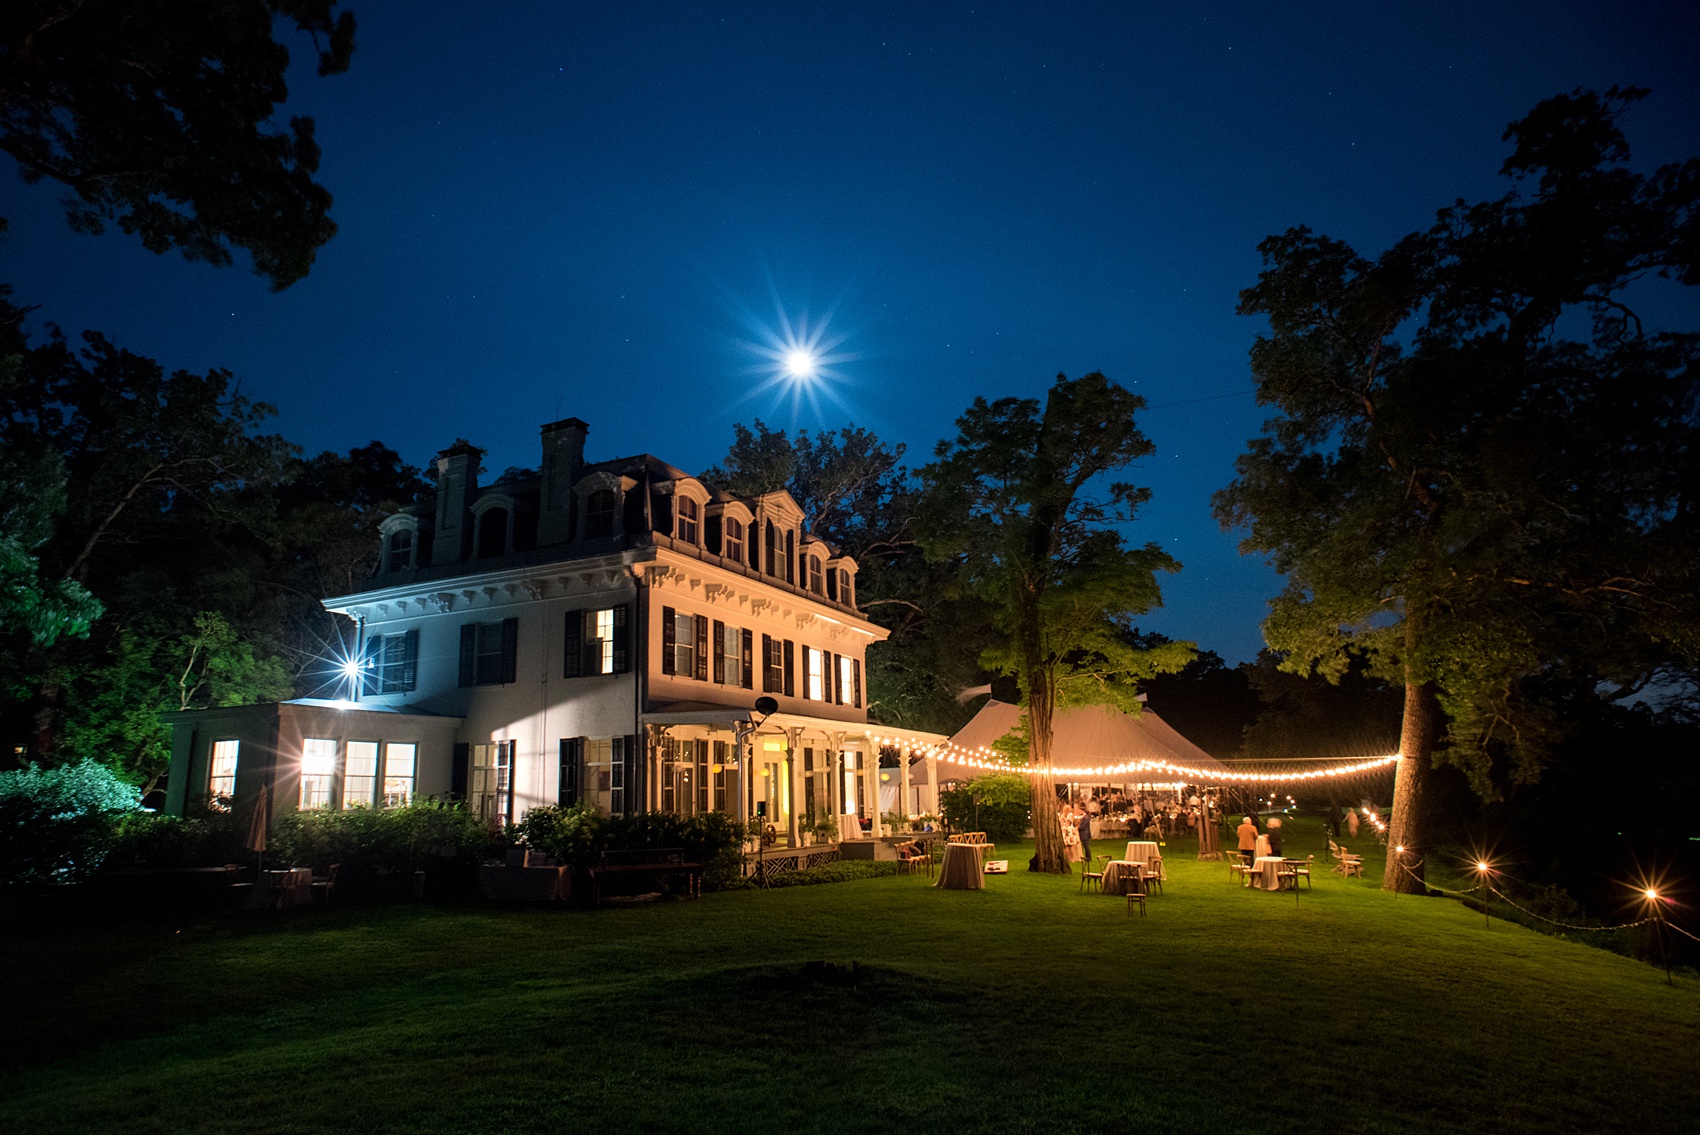 Mikkel Paige Photography photos from a Southwood Estate Wedding in Germantown, New York in the Hudson Valley. Picture of the venue at night with the moon, stars and string lights.